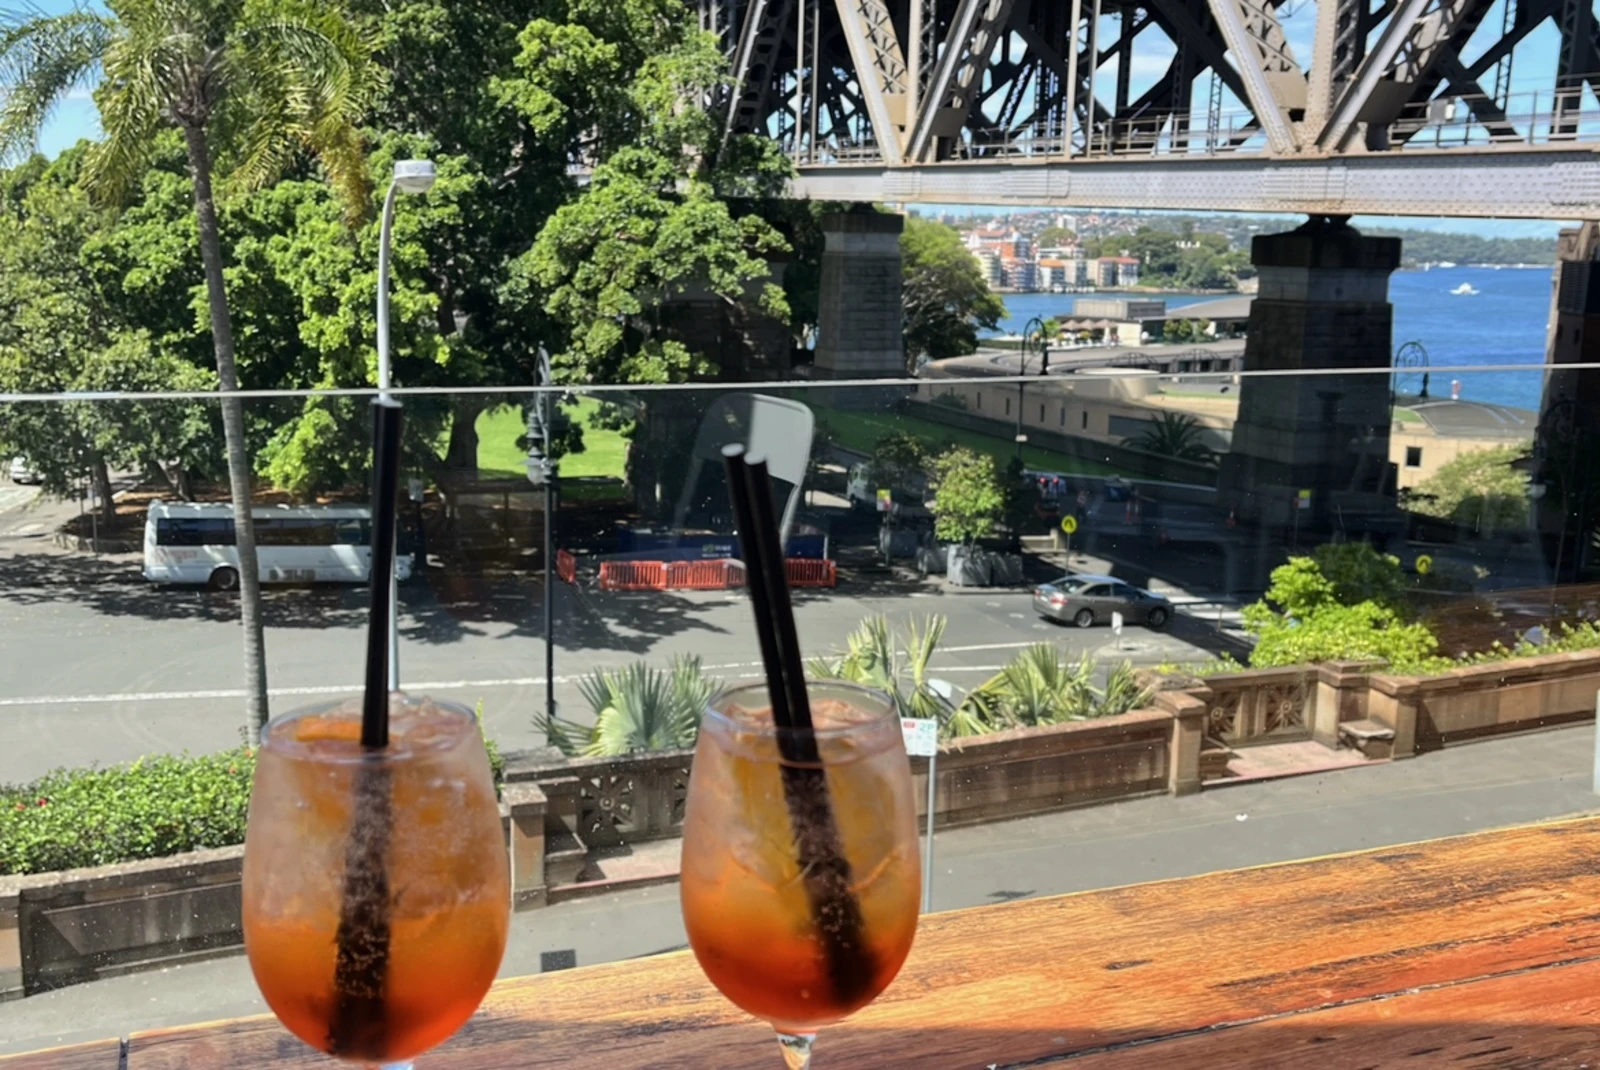 two drinks on a wooden table overlooking bridge and tree